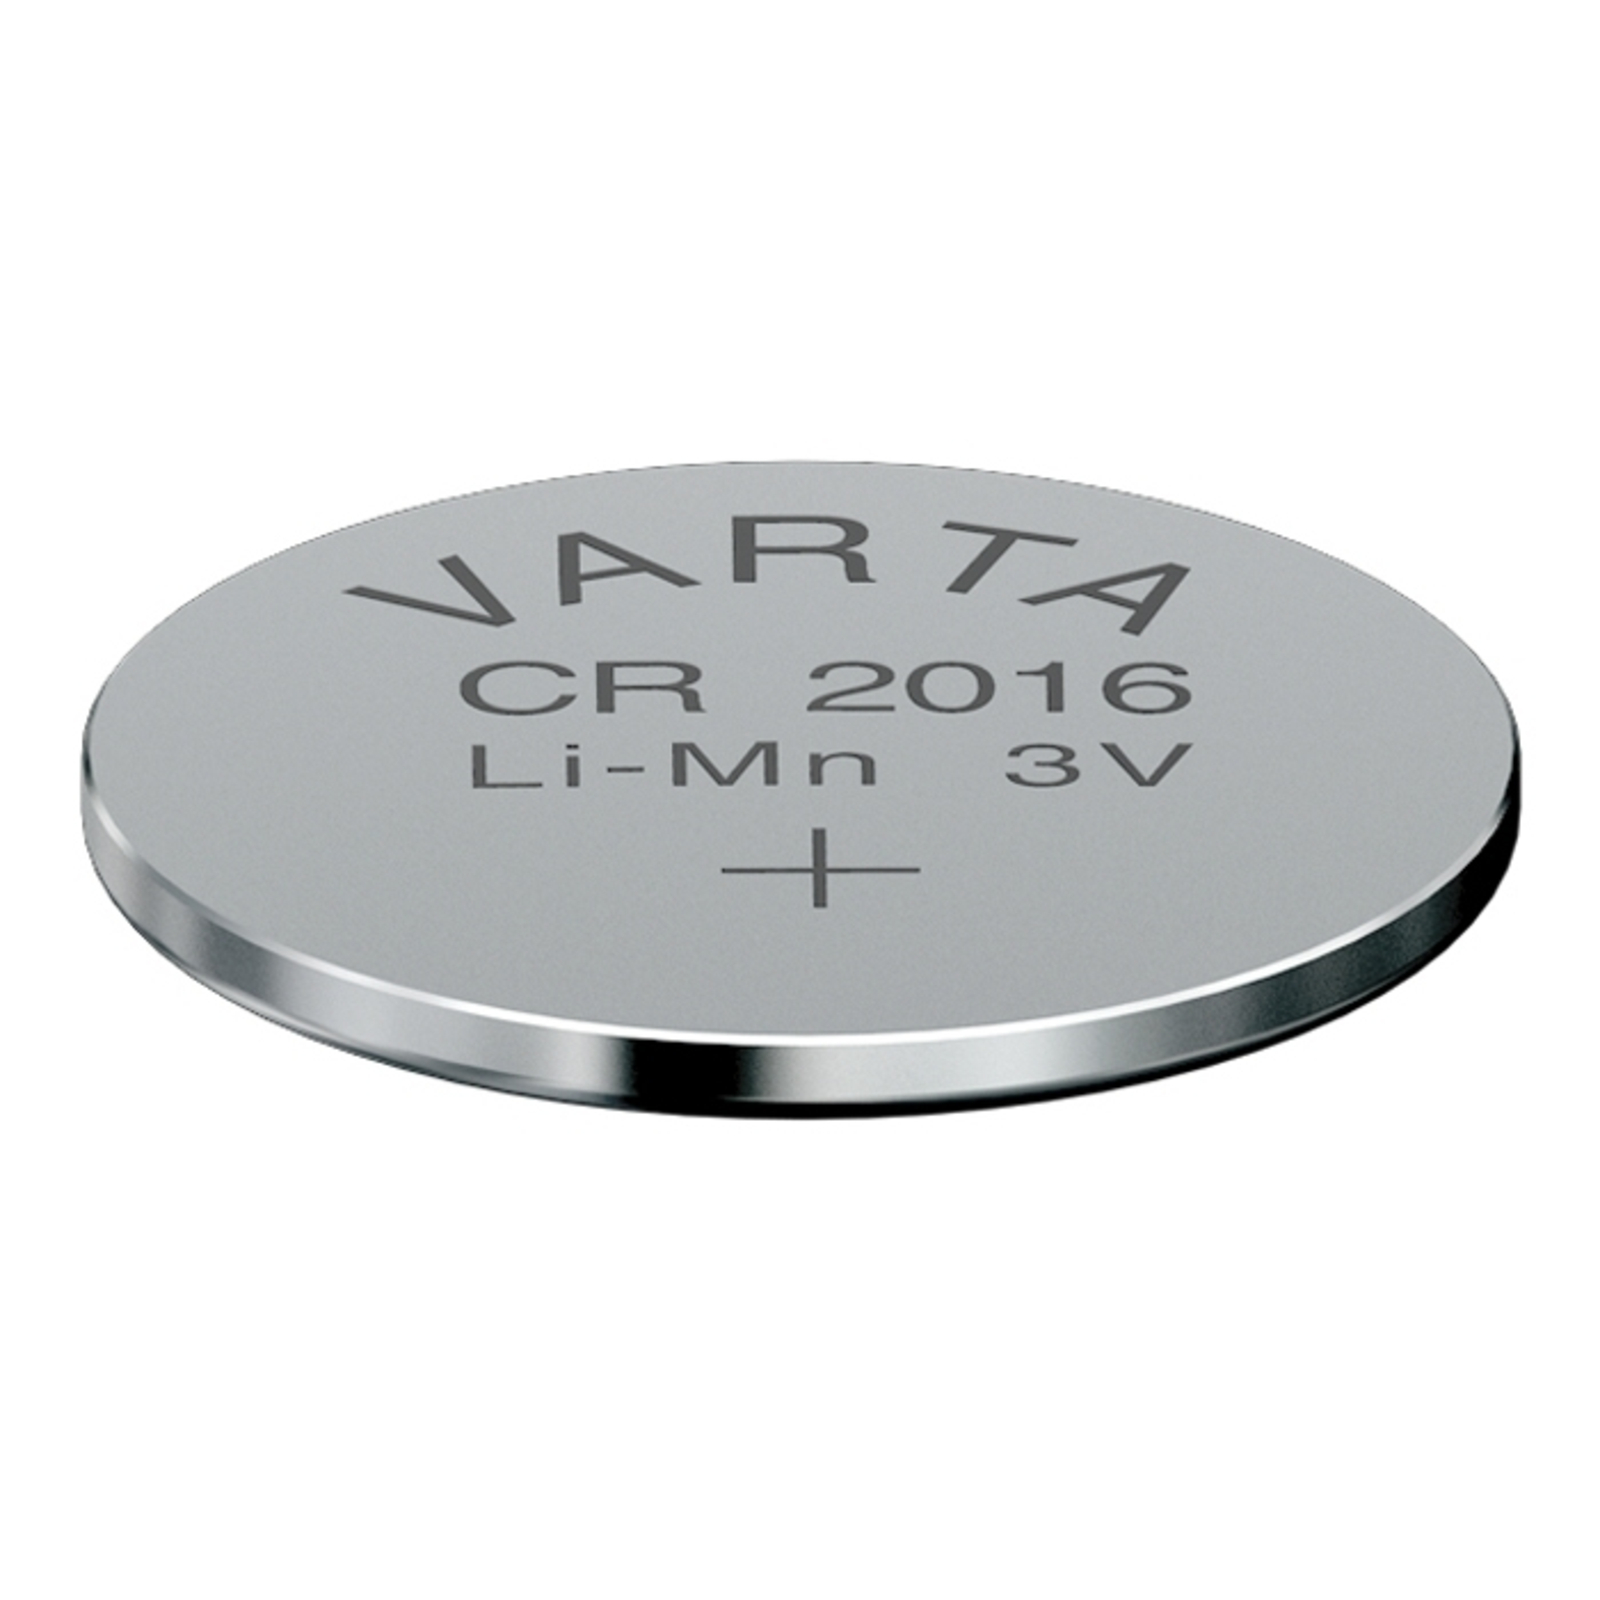 CR2016 3 V lithium button cell from VARTA